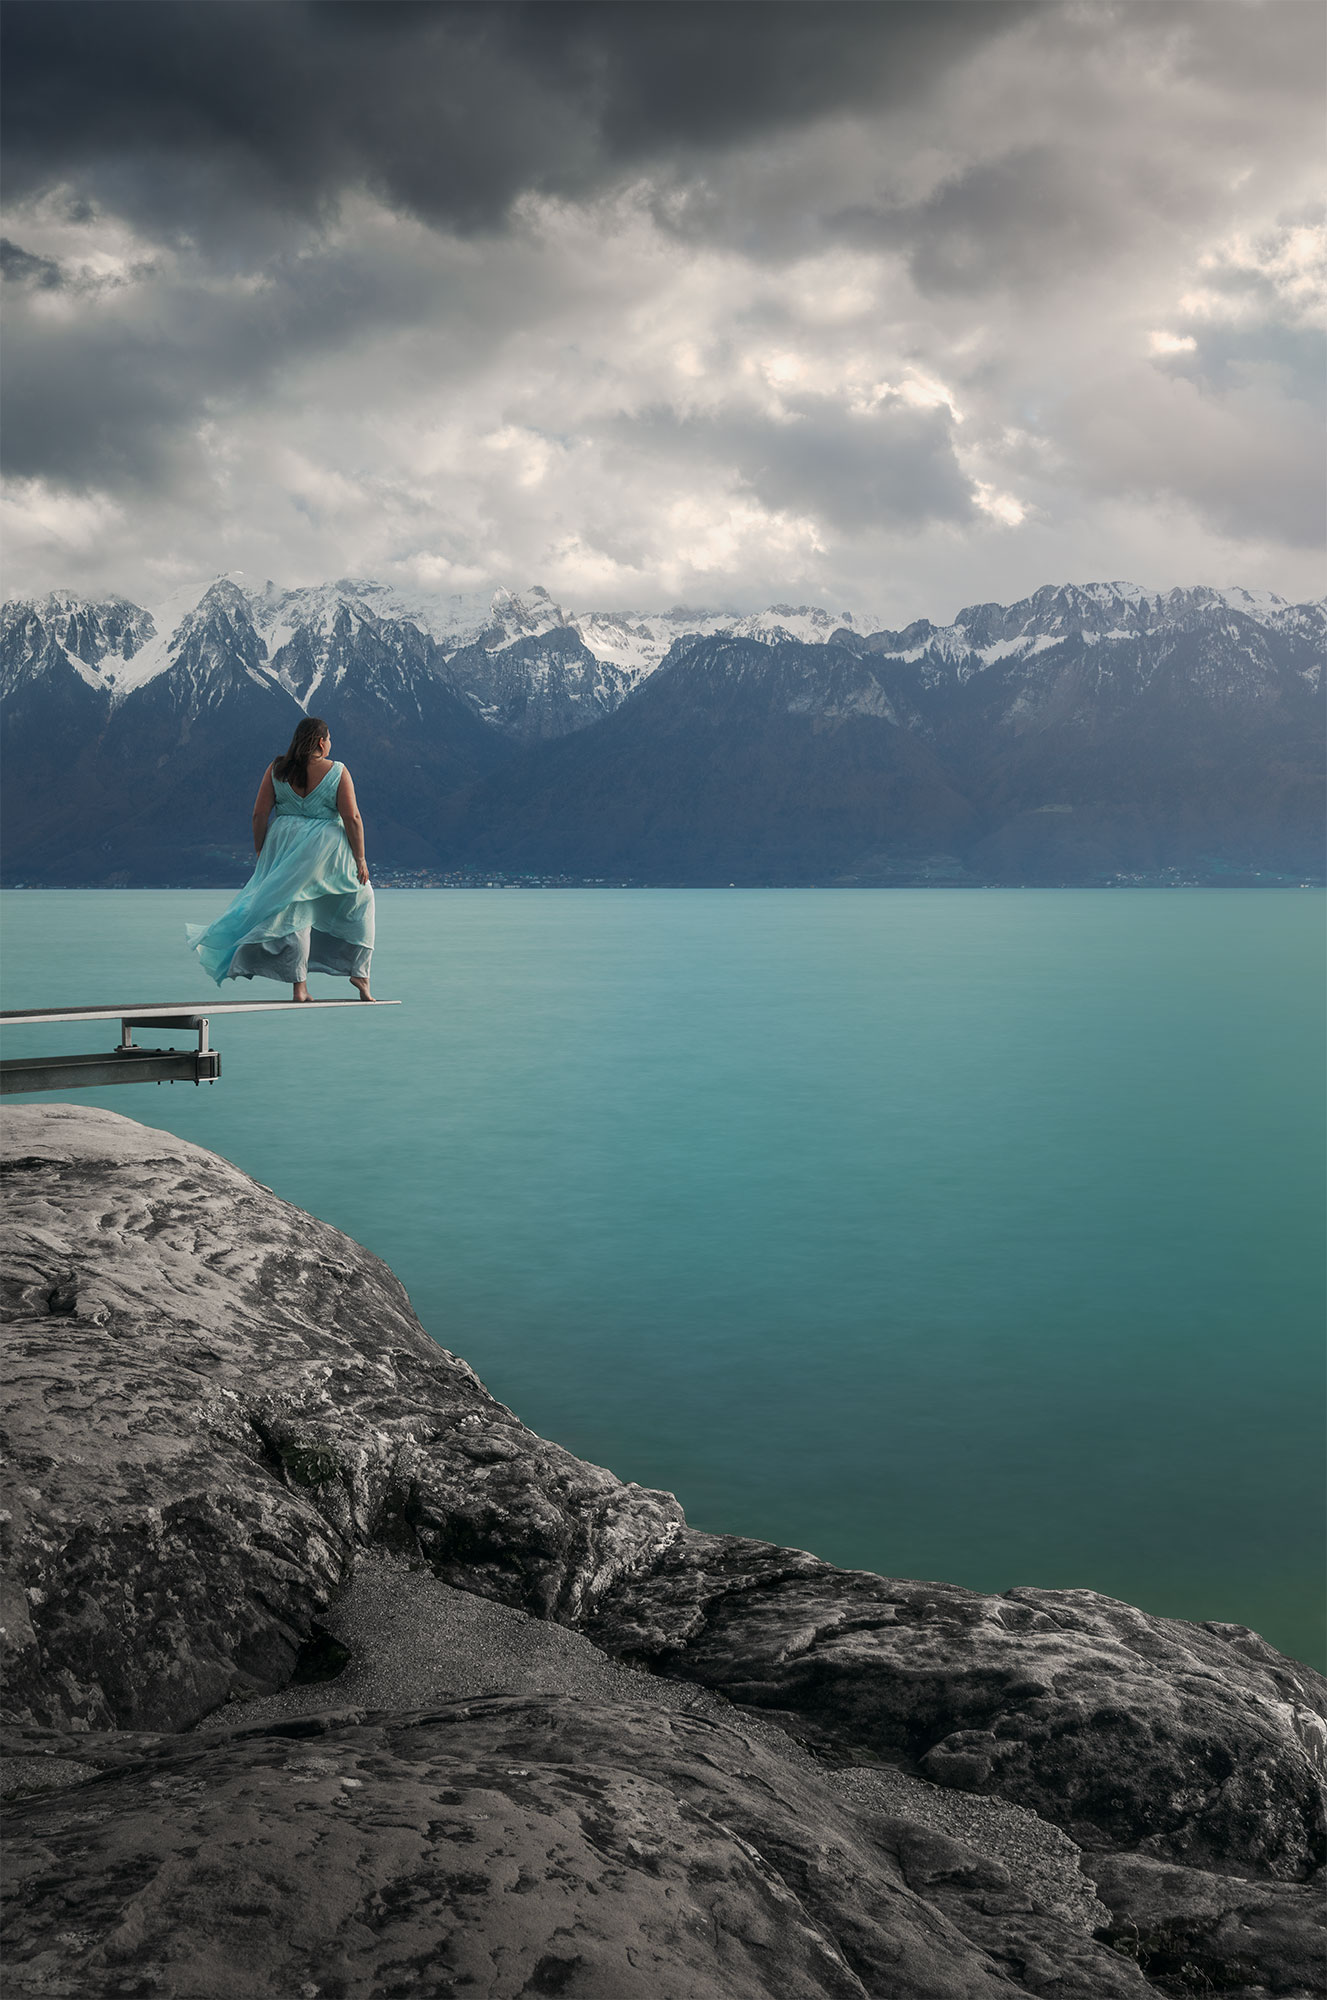 Step into the enchanting world of Swiss landscape photographer Jennifer Esseiva through this captivating self-portrait. Adorned in a stunning turquoise ice blue dress reminiscent of a Disney princess, she stands poised on a diving board in Saint-Saphorin, amidst the breathtaking Lavaux vineyards of Switzerland. With Geneva Lake as her backdrop, Jennifer invites you to join her in this mesmerizing moment, where nature's beauty and artistic expression converge seamlessly. Explore the wonder of Switzerland's landscapes through the lens of this talented photographer.